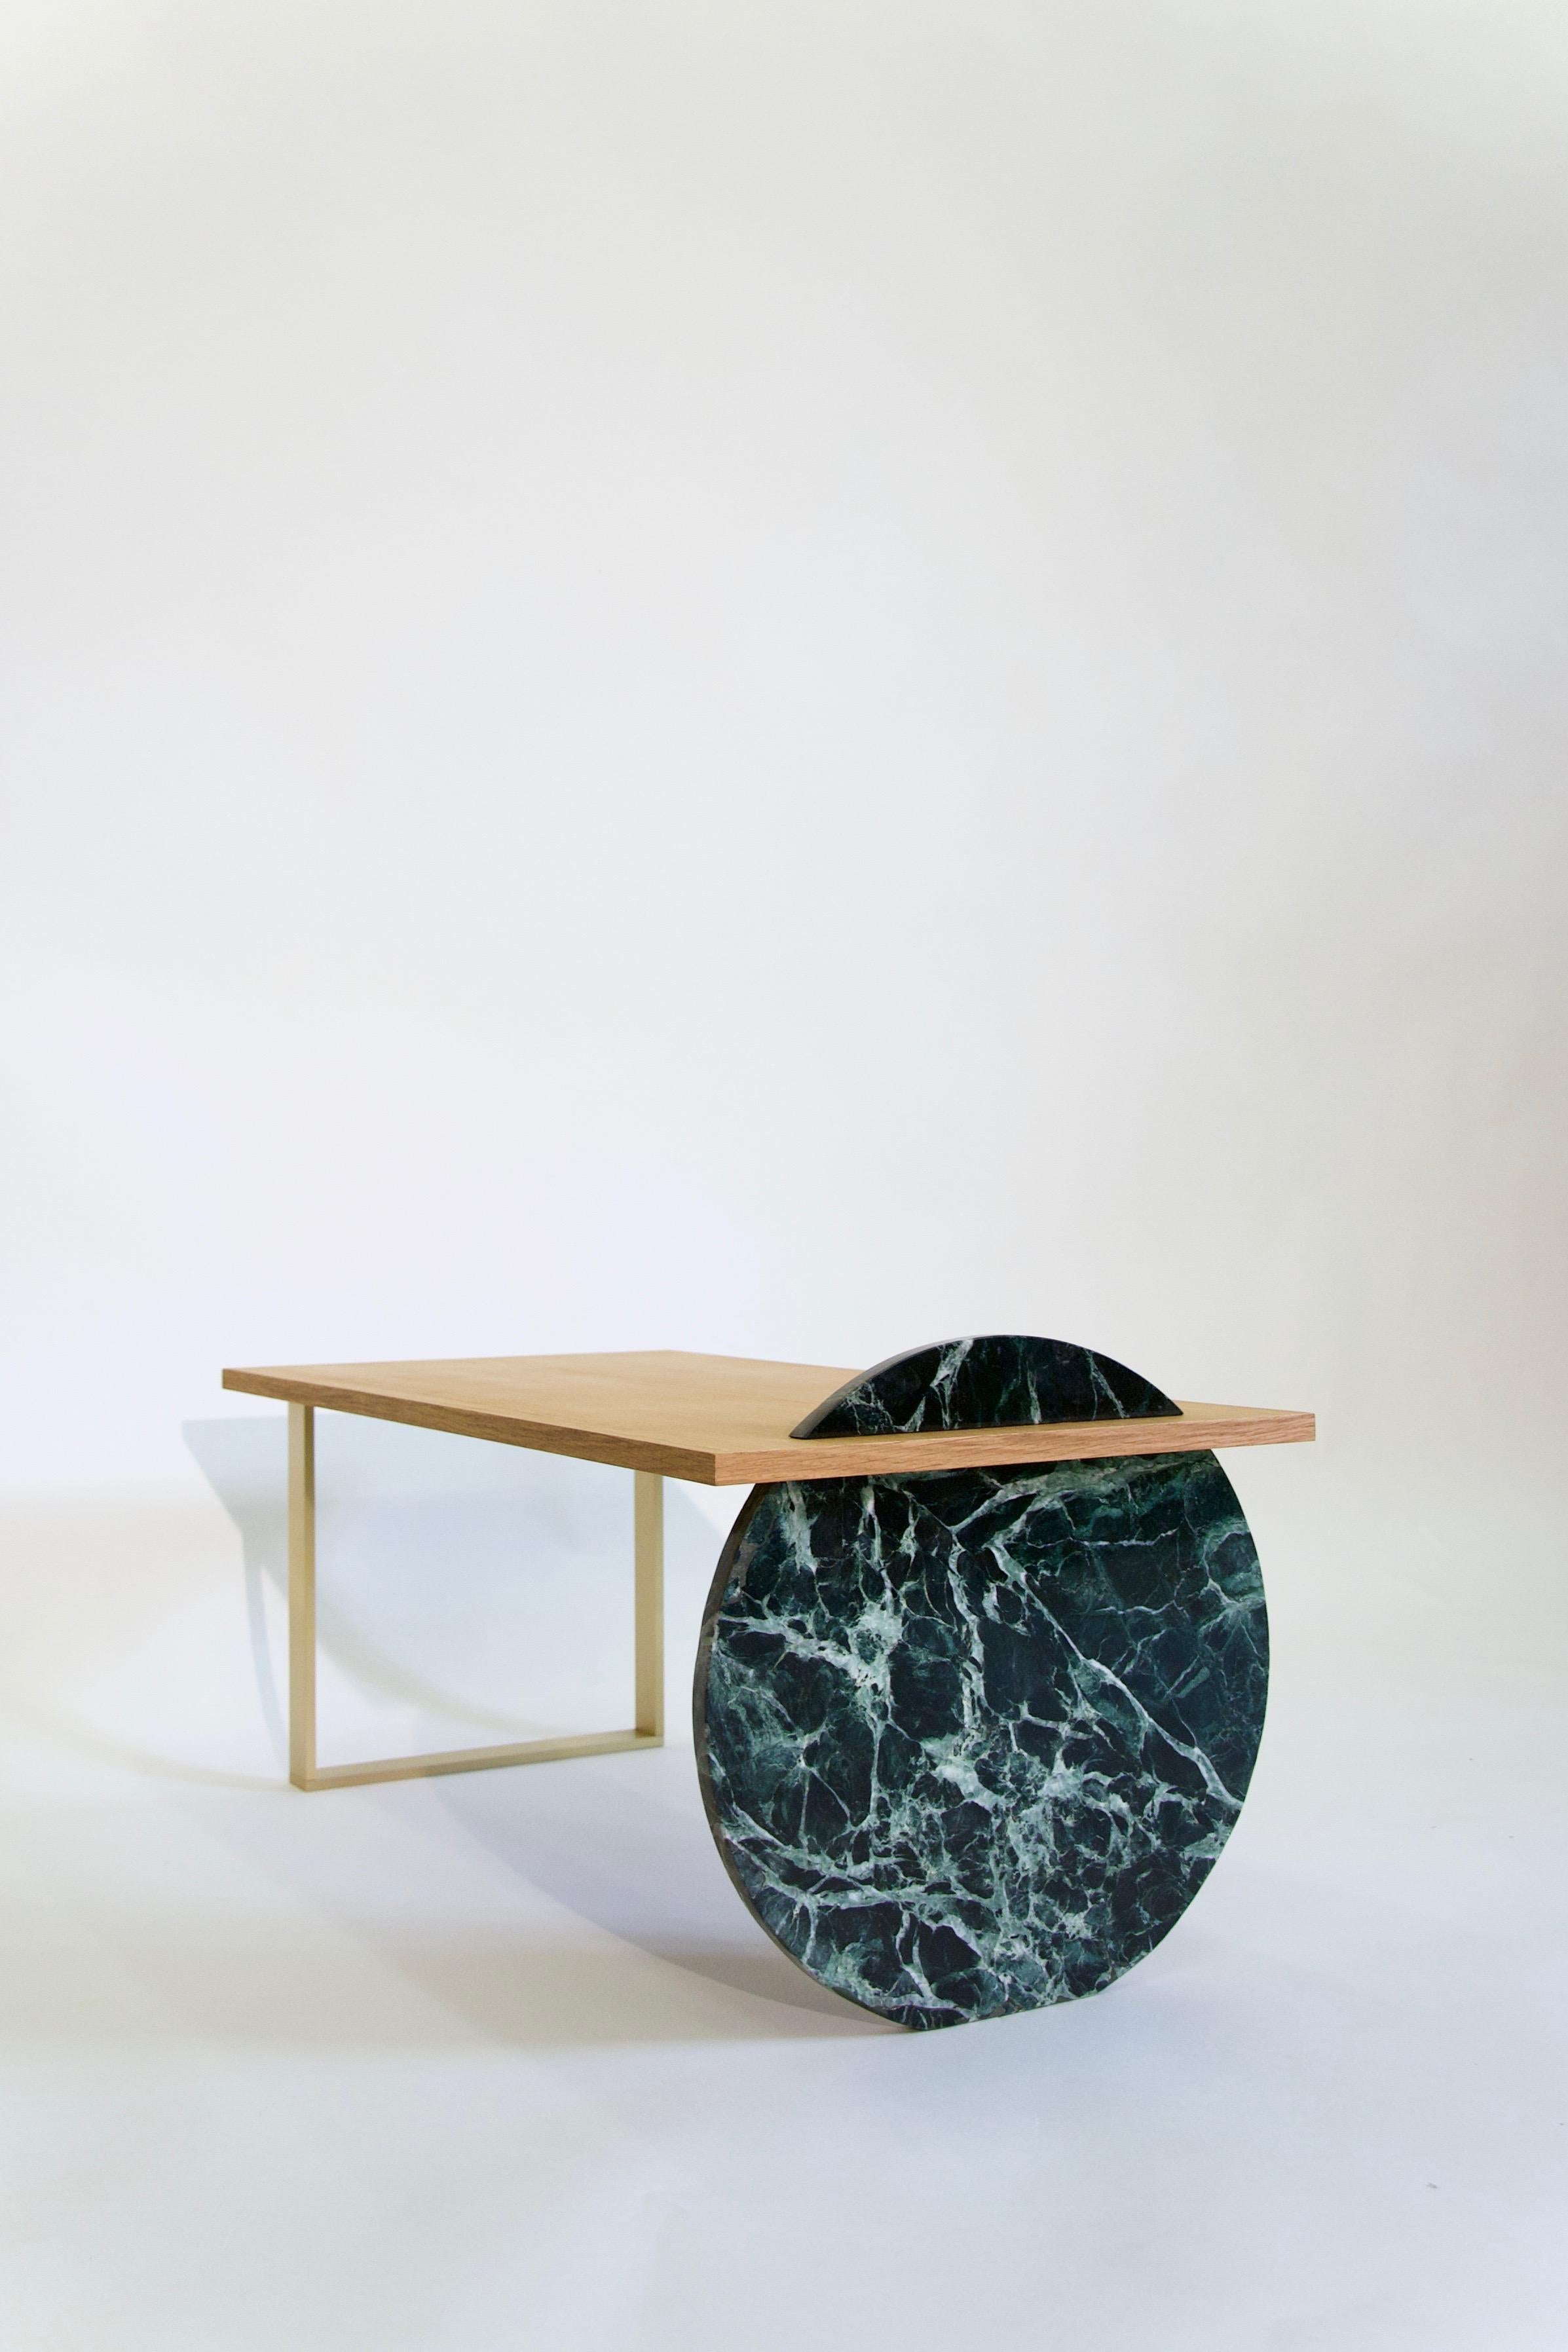 ADN coffee table by Helder Barbosa
Materials: Marble, CP oak and brass
Dimensions: 93 x 46 x 37 cm

Trained as a craftsman (école Boulle, 2014), Helder Barbosa is a designer who lives and works in Paris.

Attracted by minimalist shapes, he